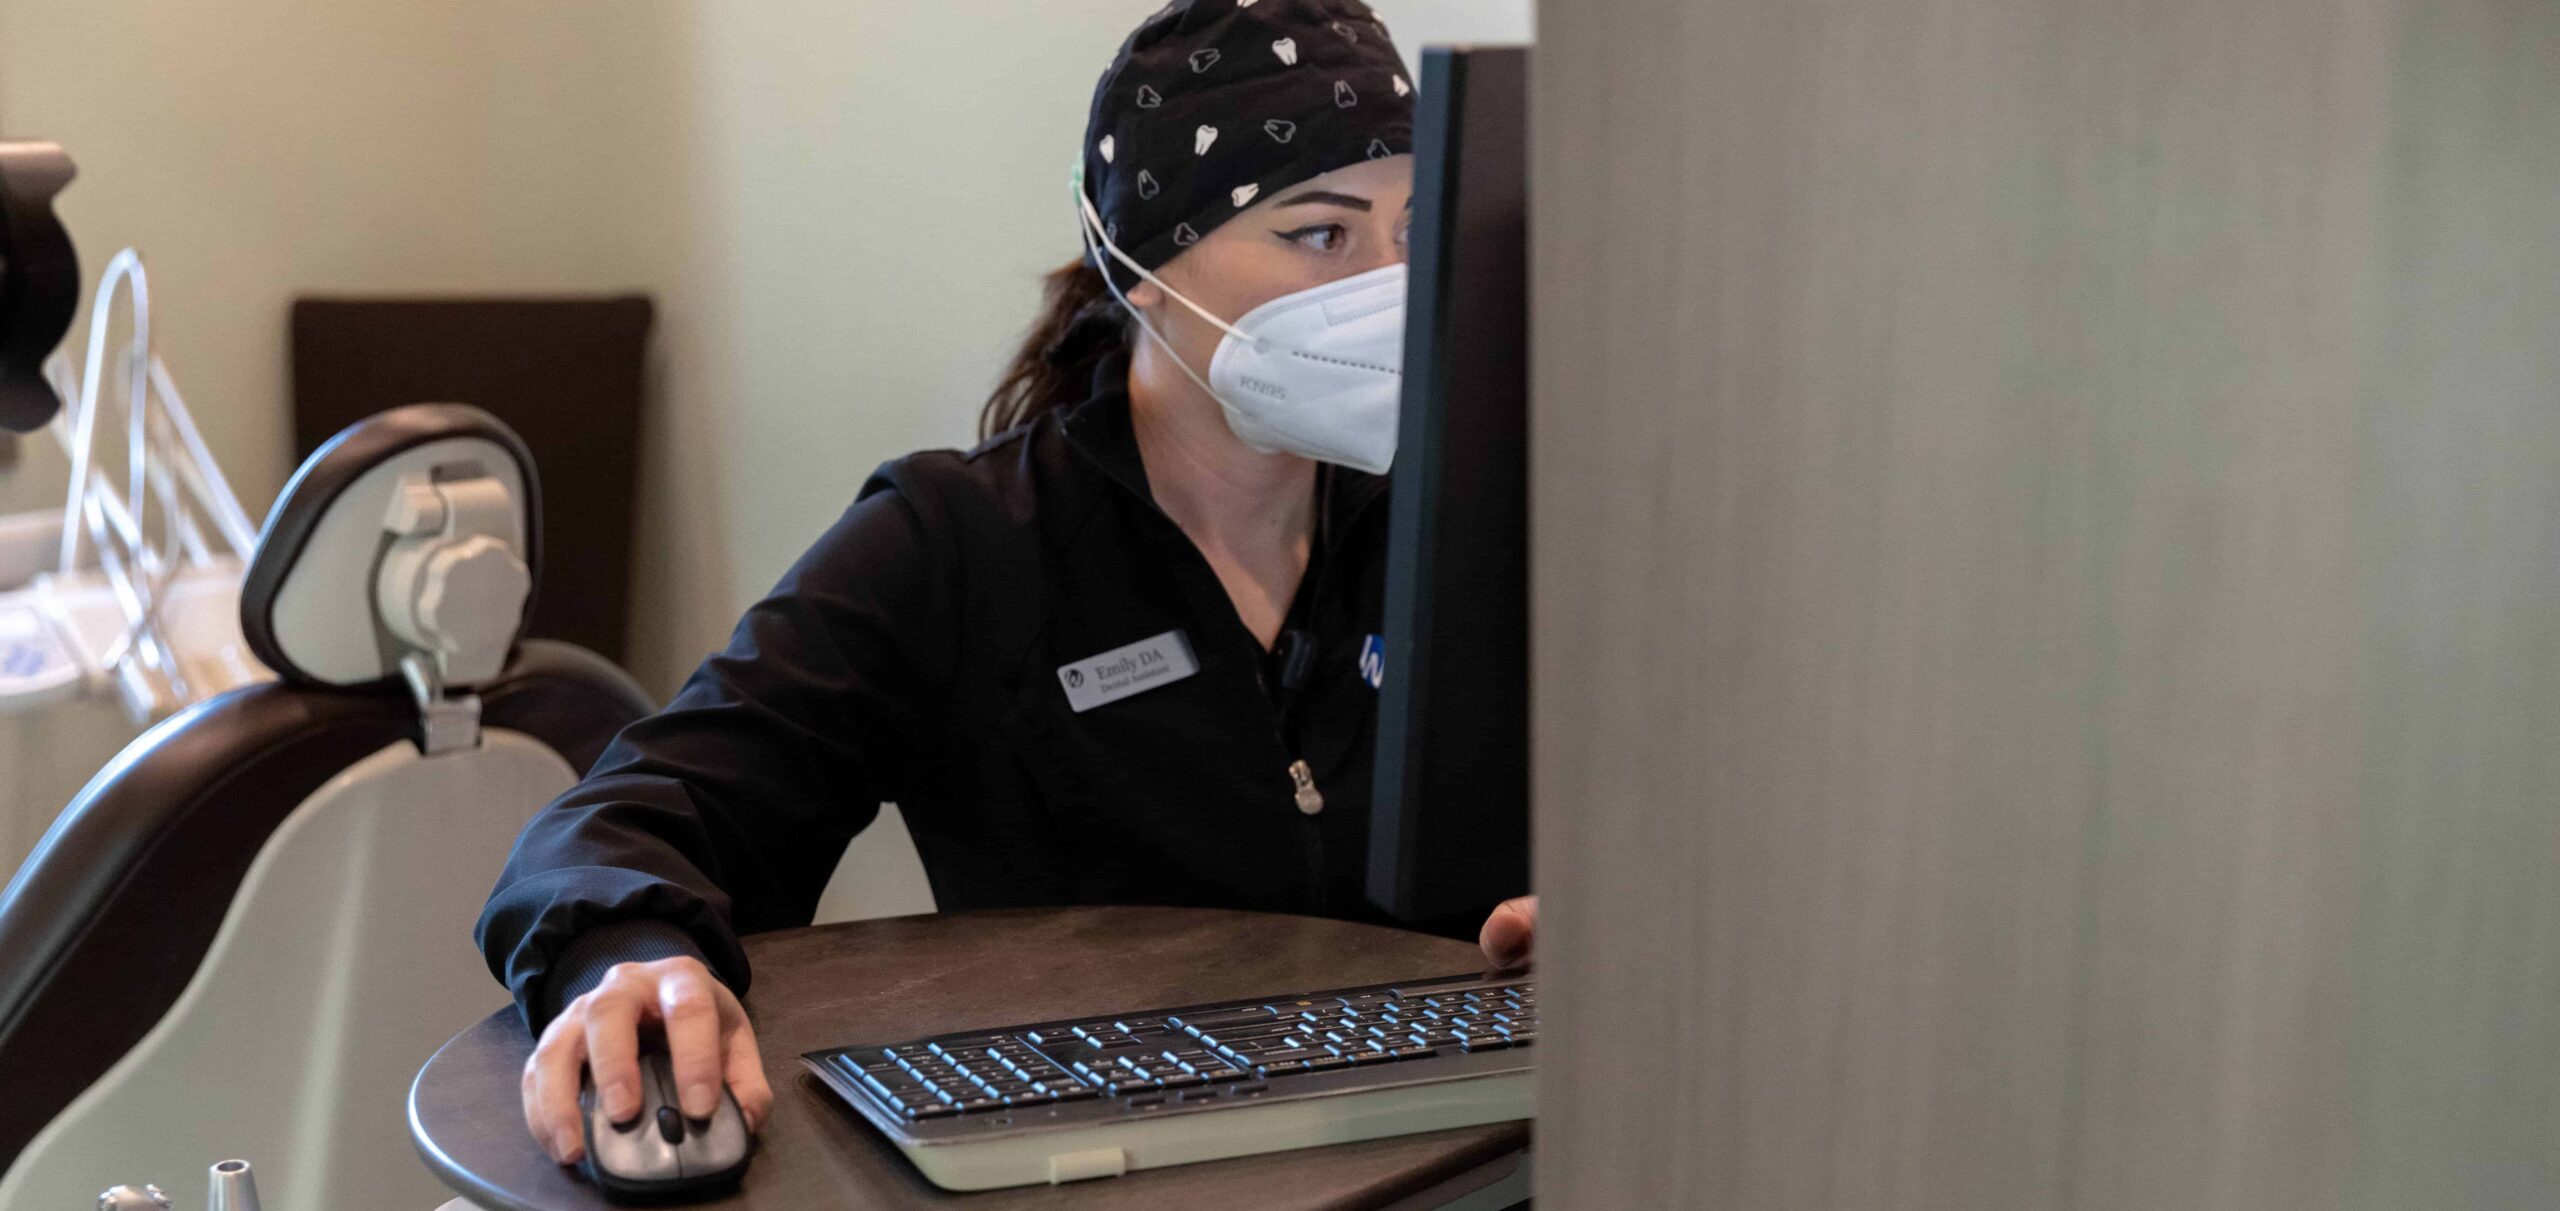 A member of the West Wind Dental Team at the computer.